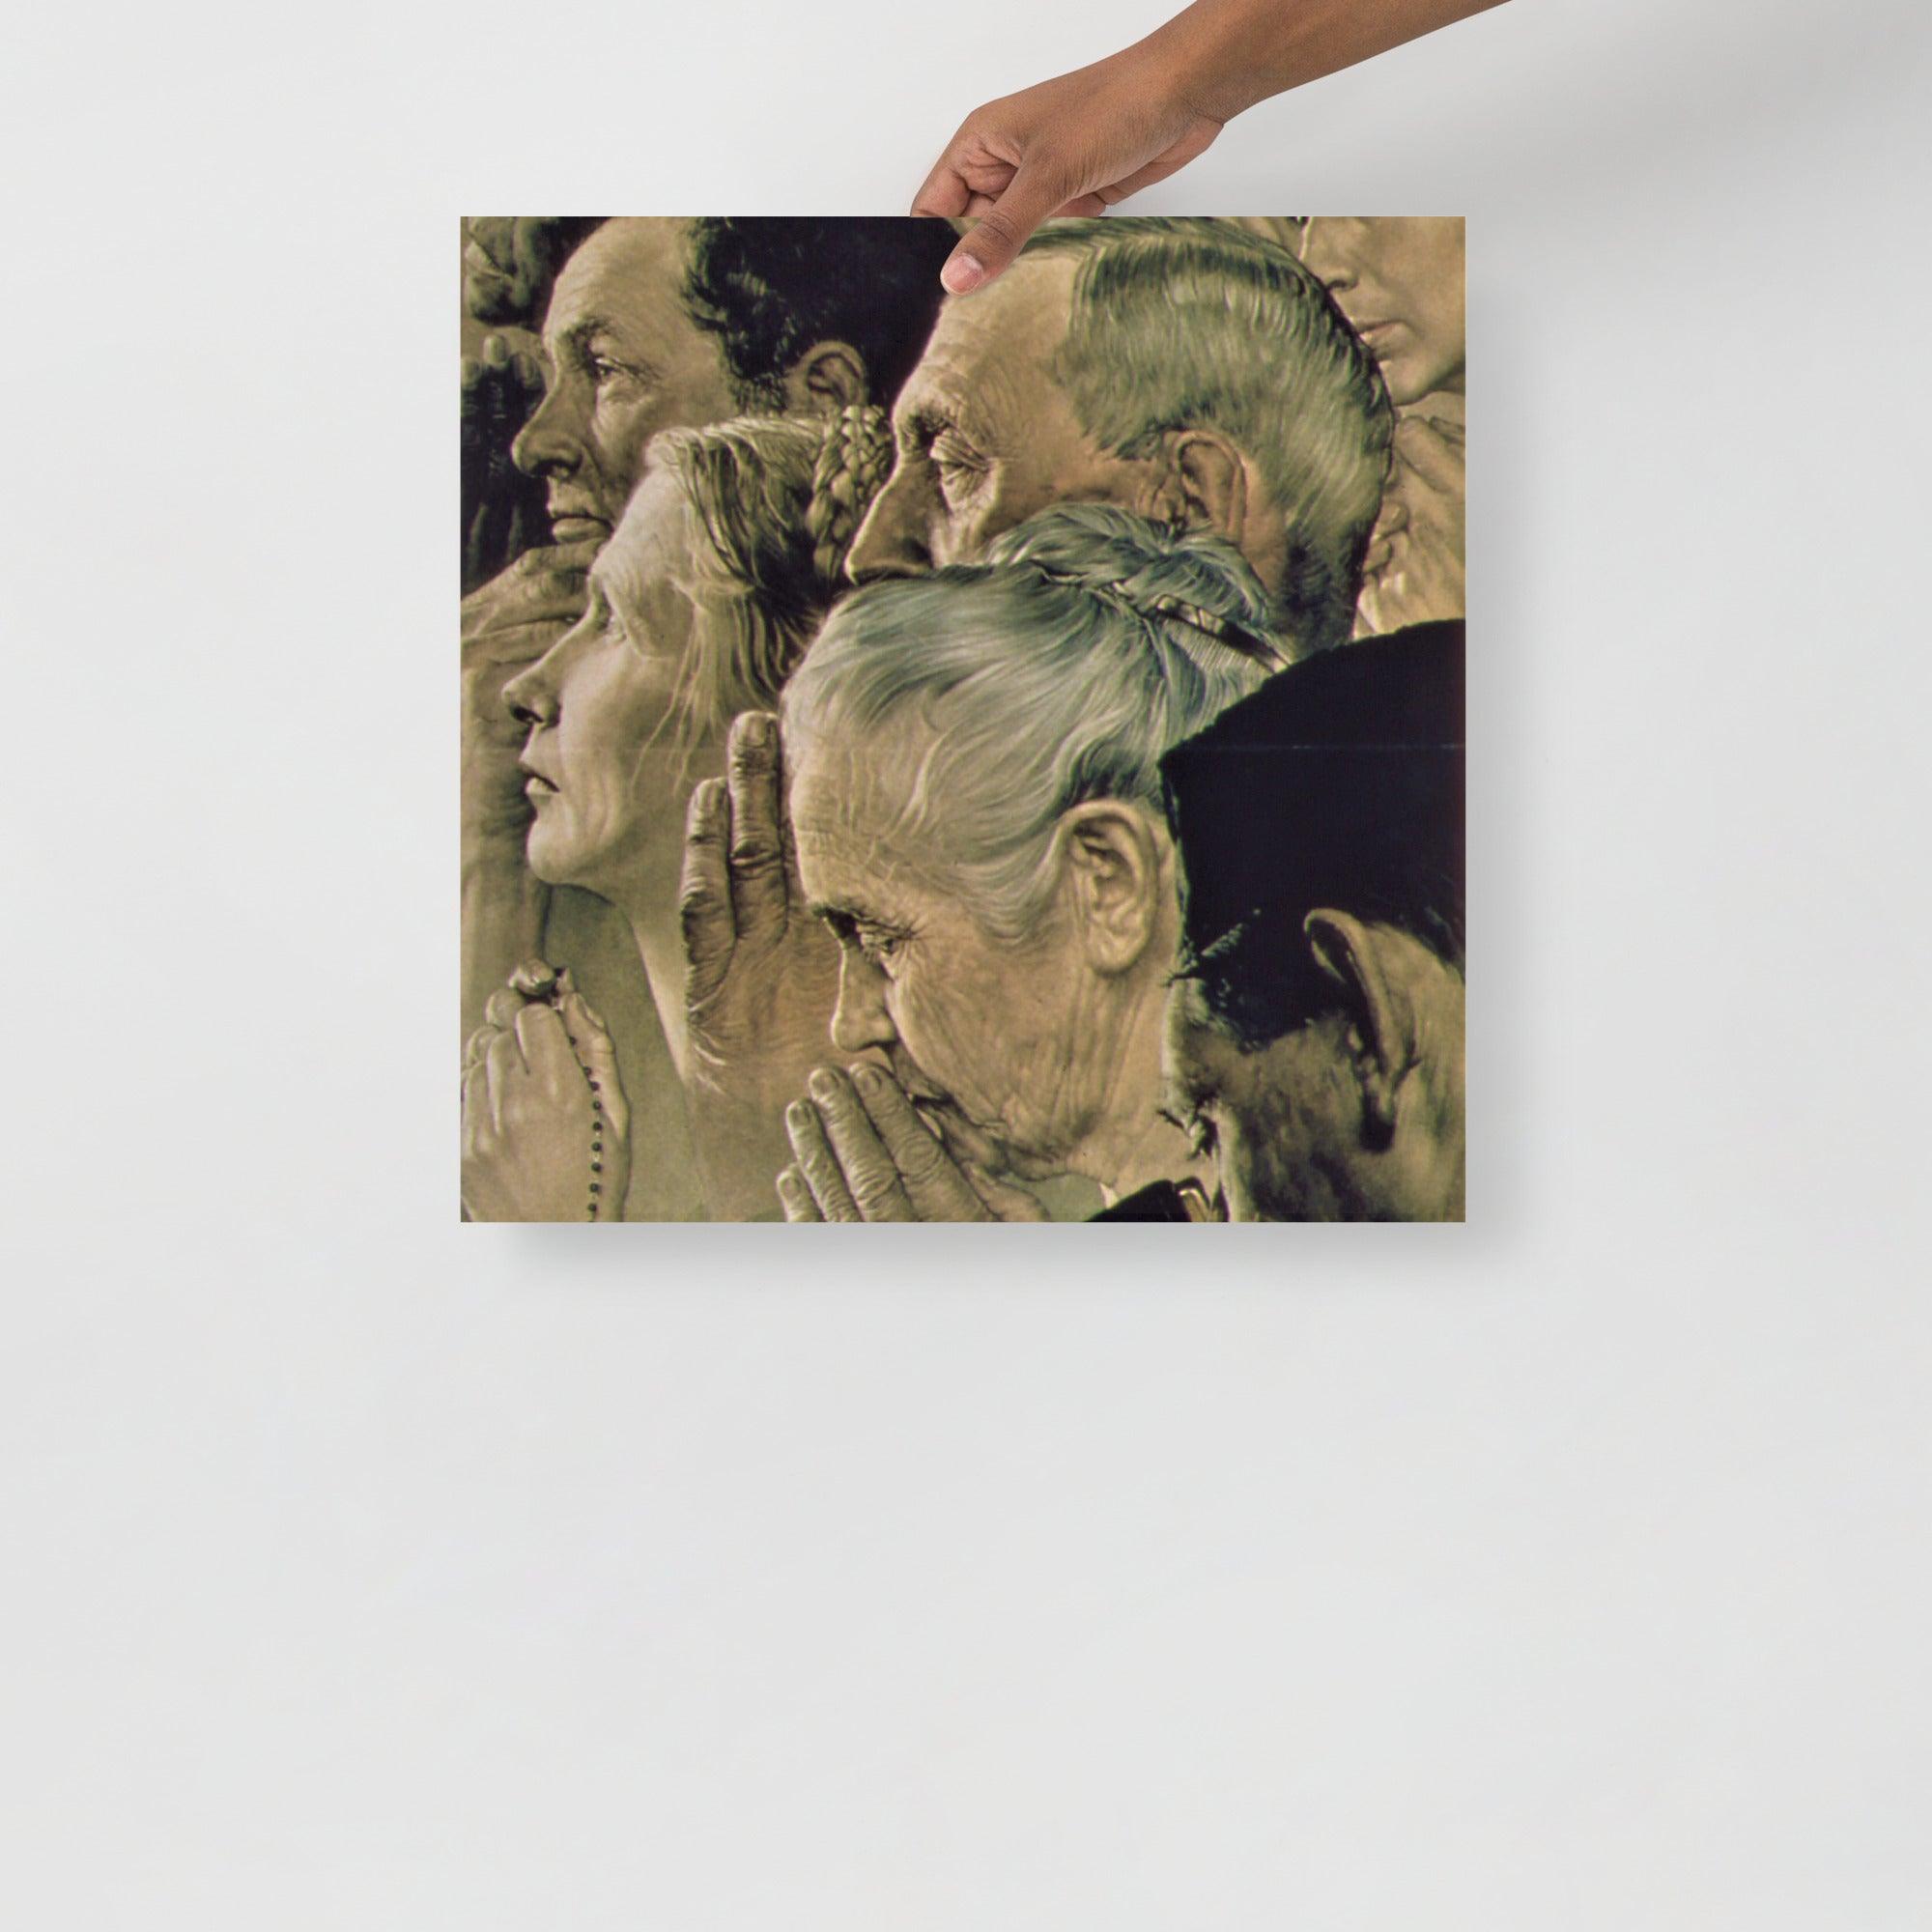 A Freedom of Worship by Norman Rockwell  poster on a plain backdrop in size 18x18”.